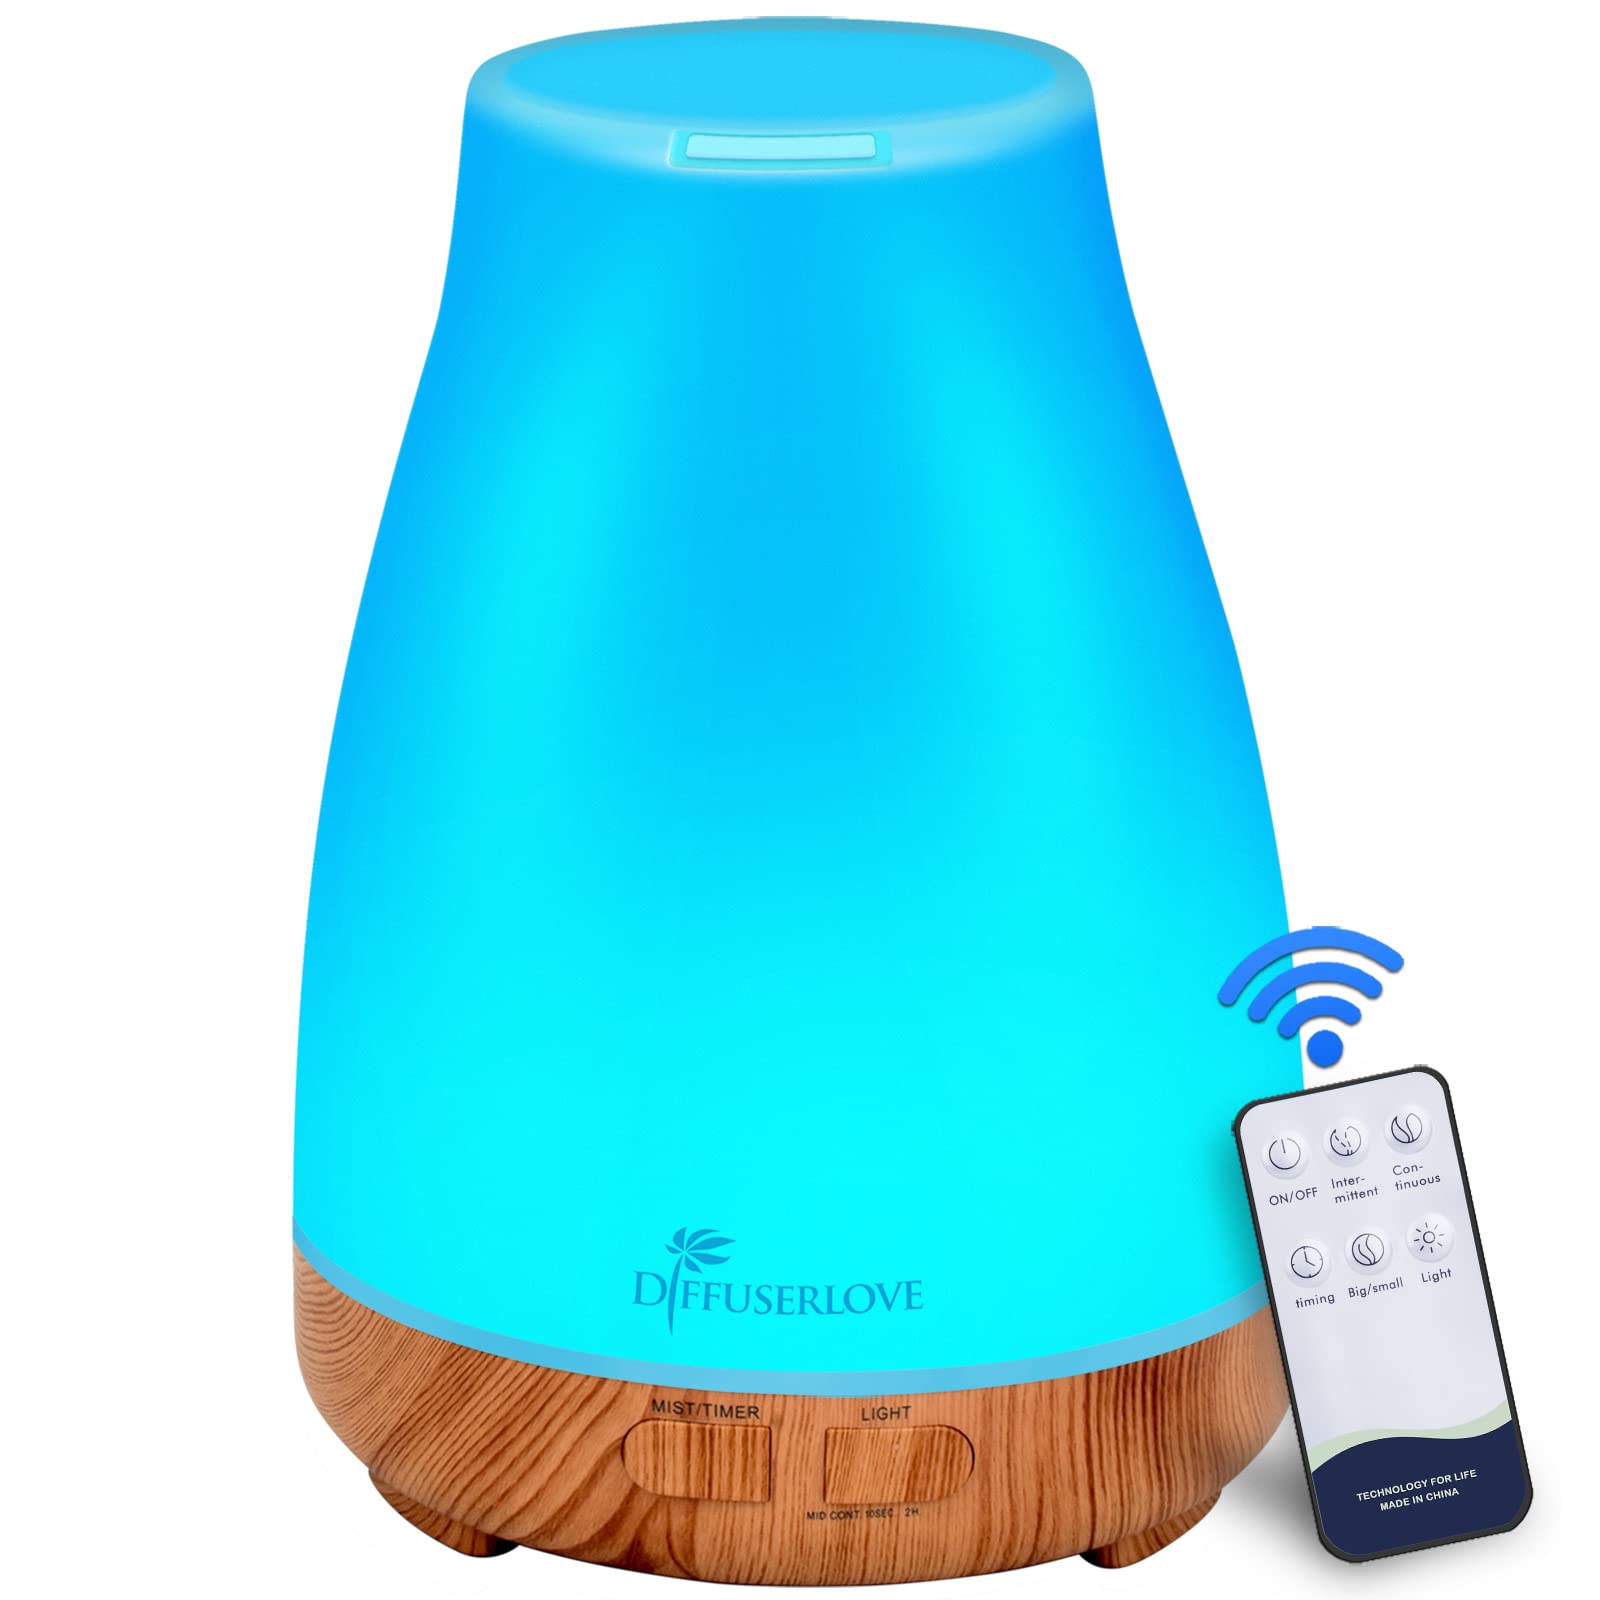 300ML Essential Oil Diffuser Remote Control Aromatherapy Diffuser Mist Humidifiers with 7 Color LED Lights and Waterless Auto Shut-Off for Bedroom Office House Kitchen Yoga